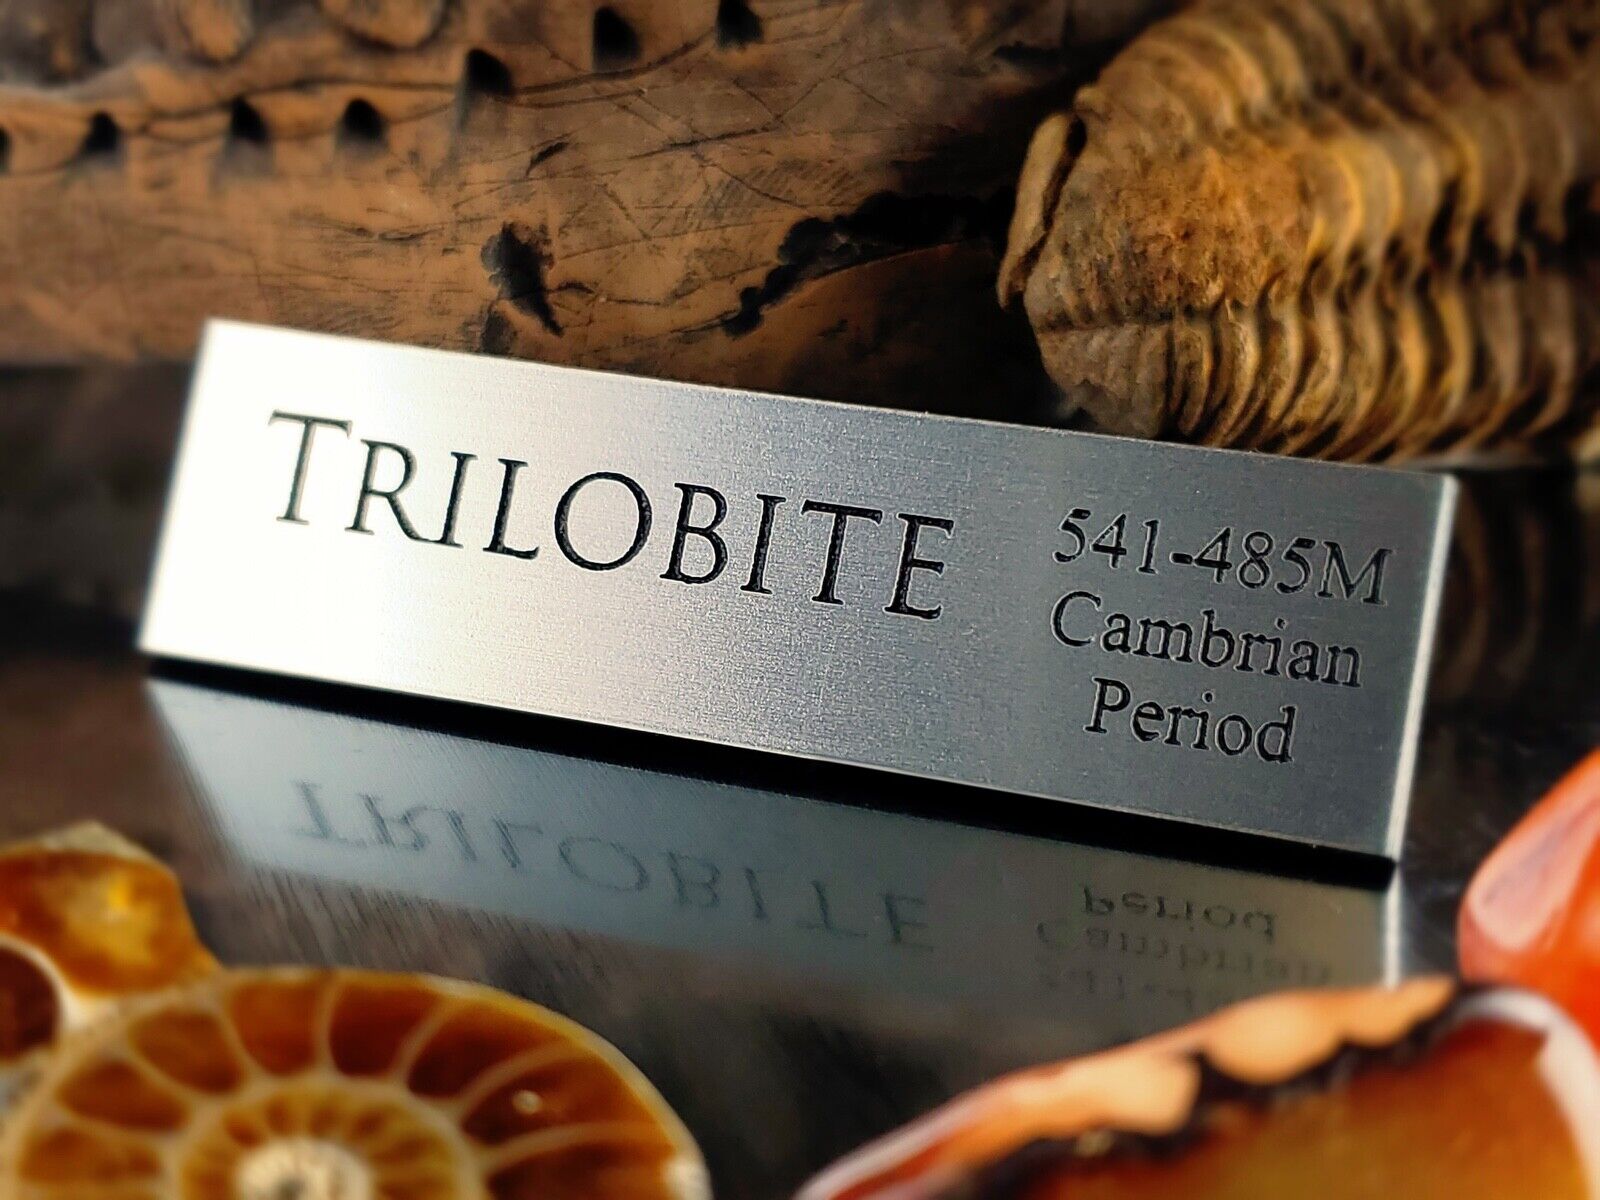 TRILOBITE FOSSIL DISPLAY NAME PLATE - EXHIBIT ARTIFACT LABEL-MUSEUM QUALITY